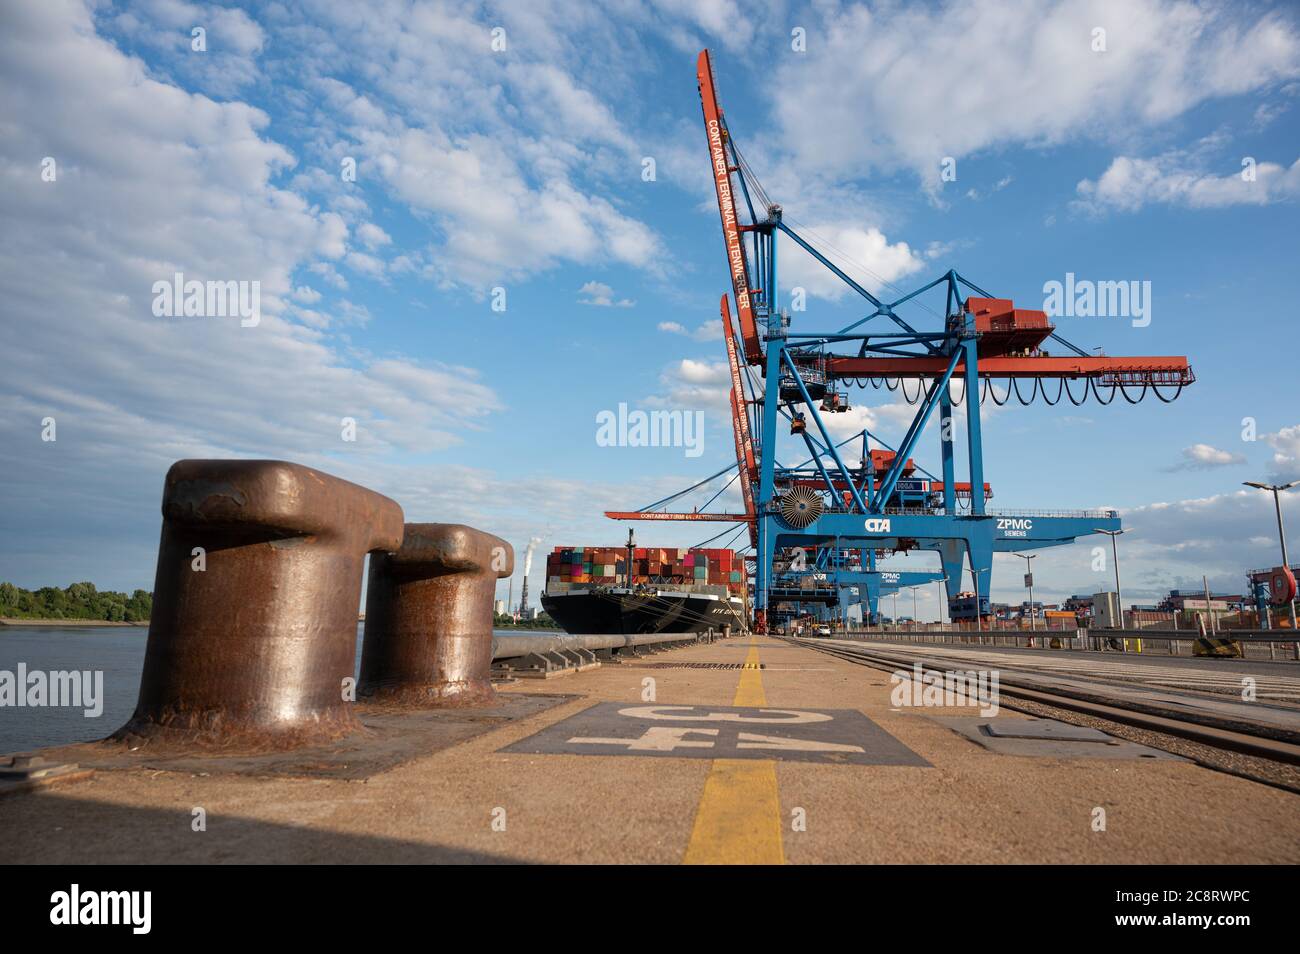 Hamburg, Germany. 16th July, 2020. A ship is loaded and unloaded at Container Terminal Altenwerder in the Port of Hamburg by container gantry cranes. Credit: Daniel Reinhardt/dpa/Alamy Live News Stock Photo